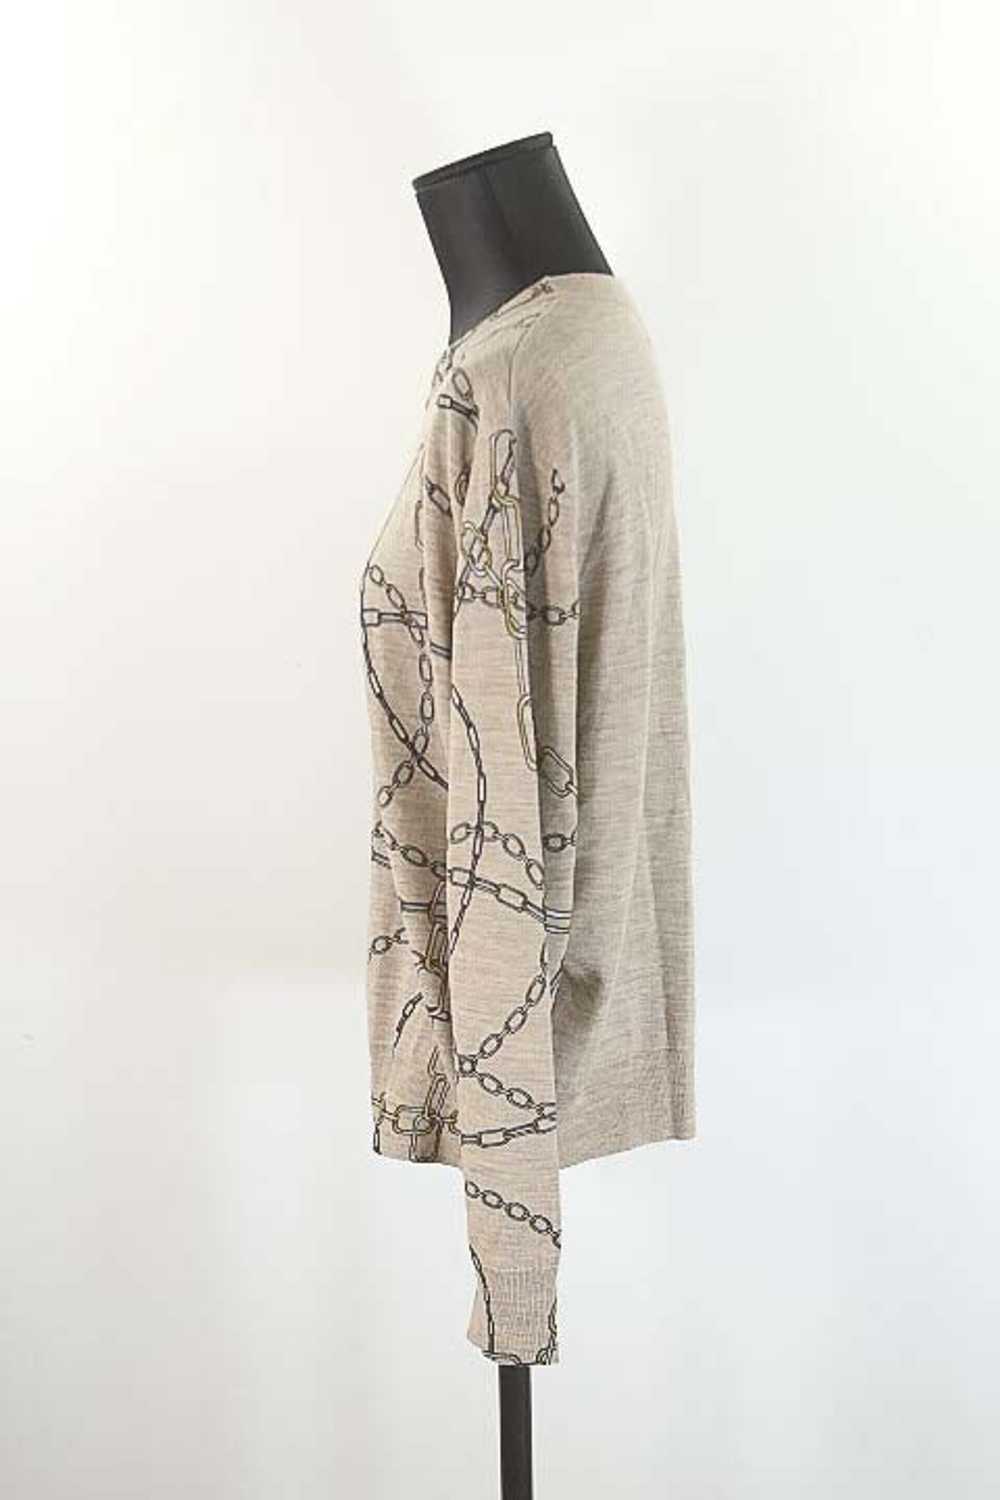 Circular Clothing Pull-over en laine Notshy gris.… - image 3